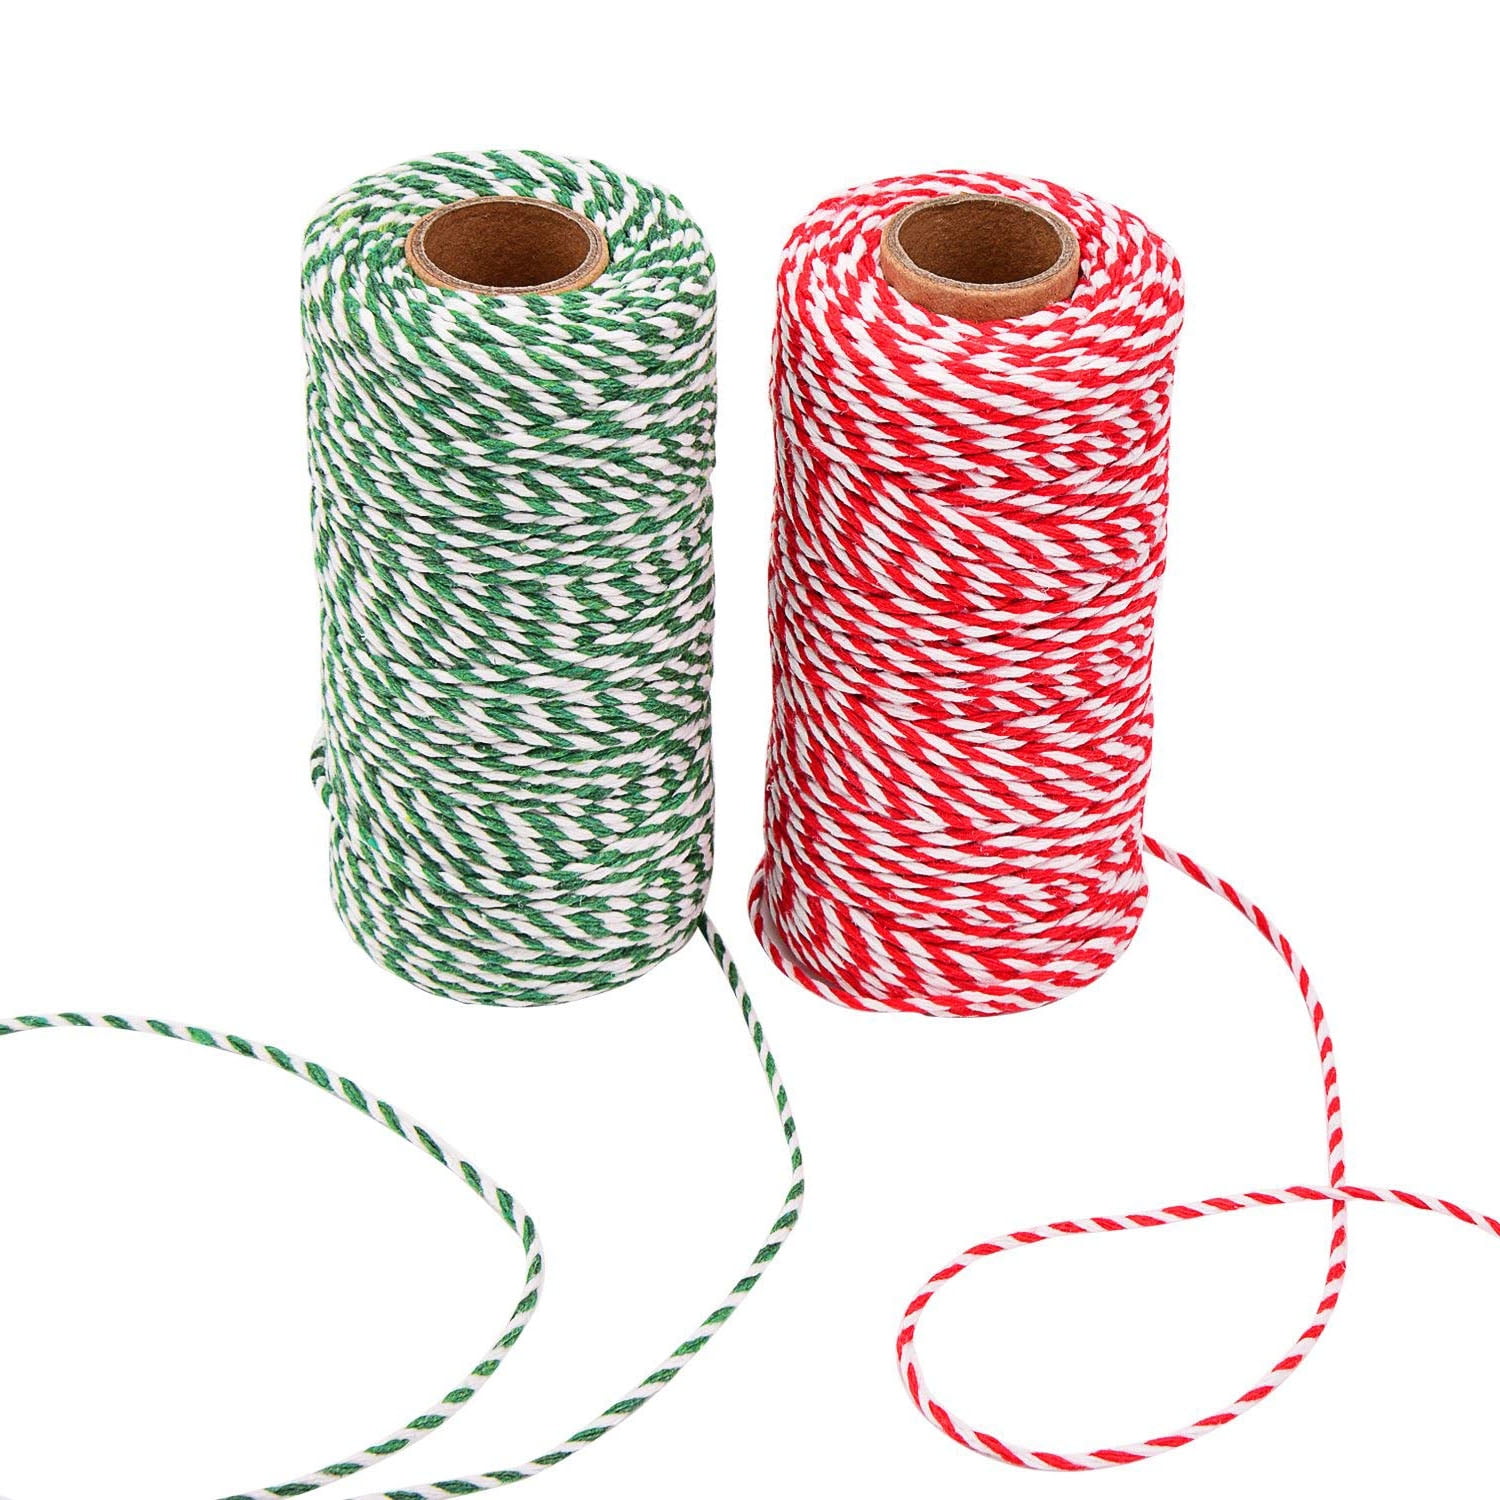 Tpyx Green and White Twine 656 Feet 200 m Cotton Baker Twine Christmas Gift Wrapping Cotton String Crafts and Holiday Decorations